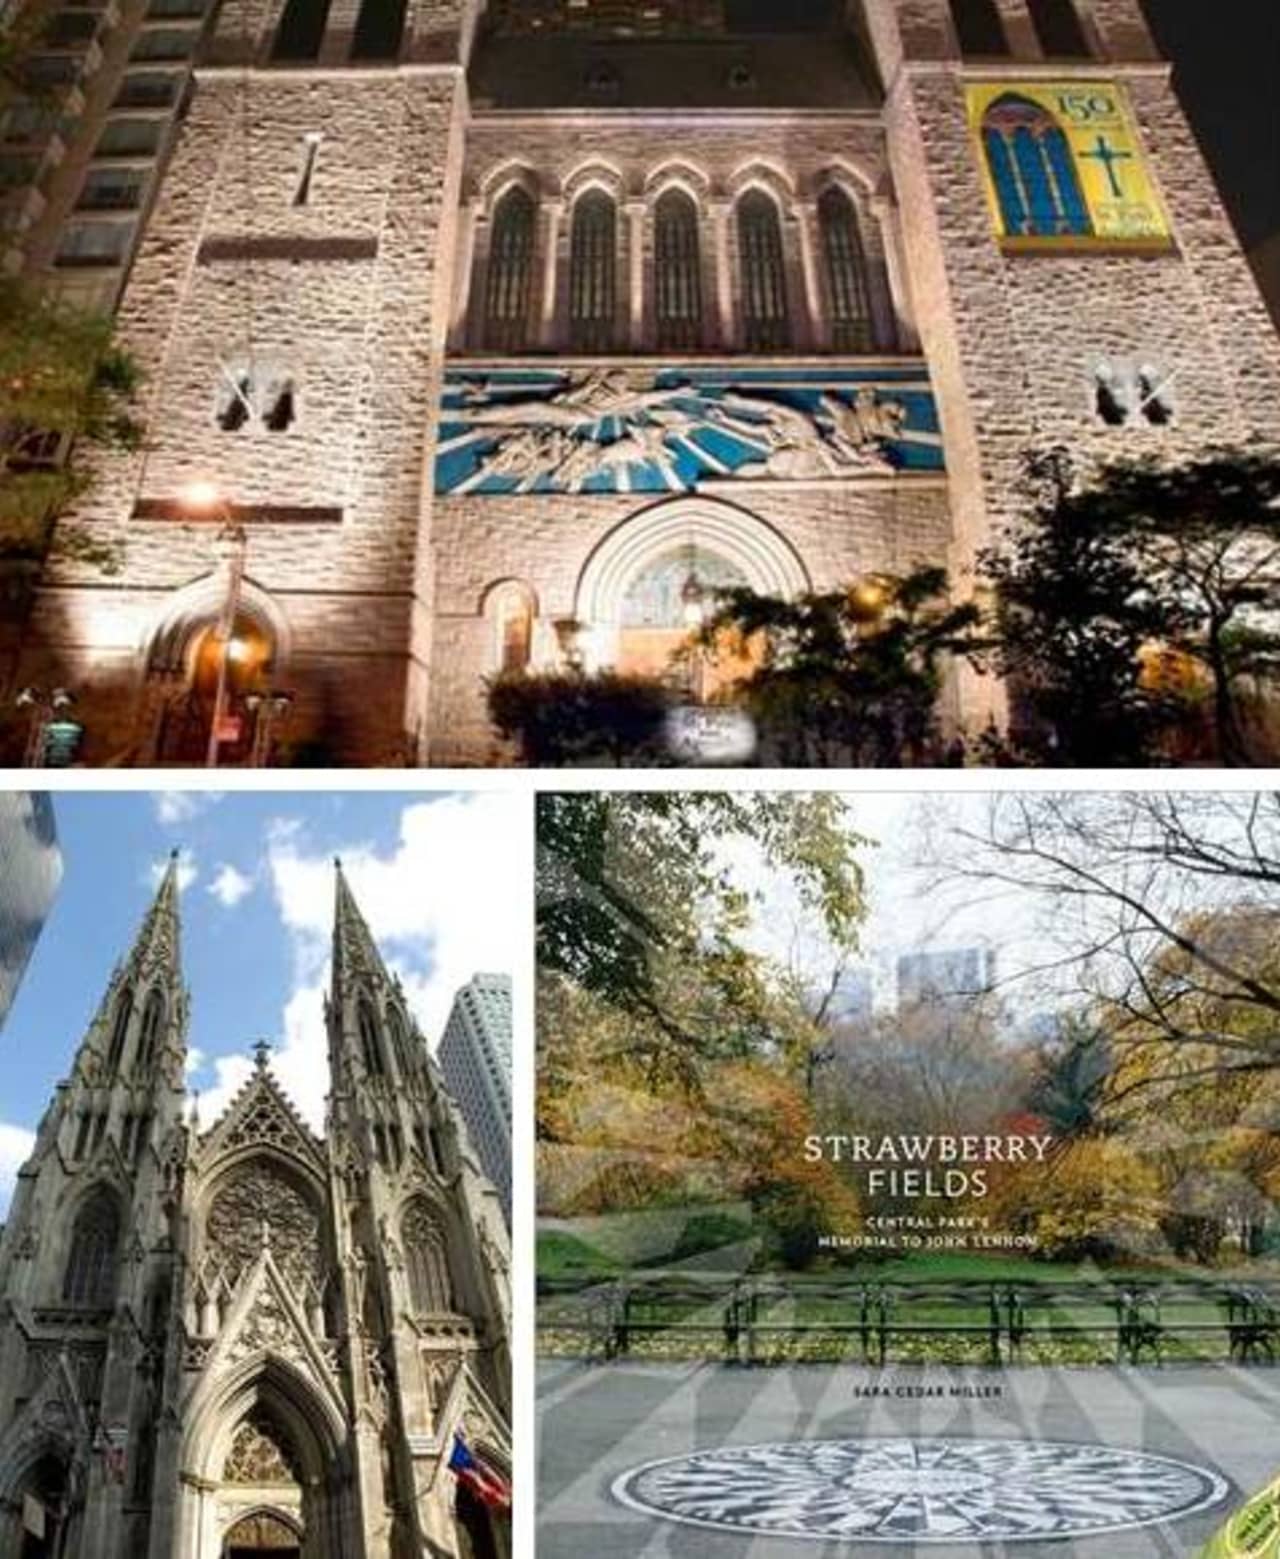 Silvermine Arts Center will be offering three special walking art and architecture tours this fall in New York City.